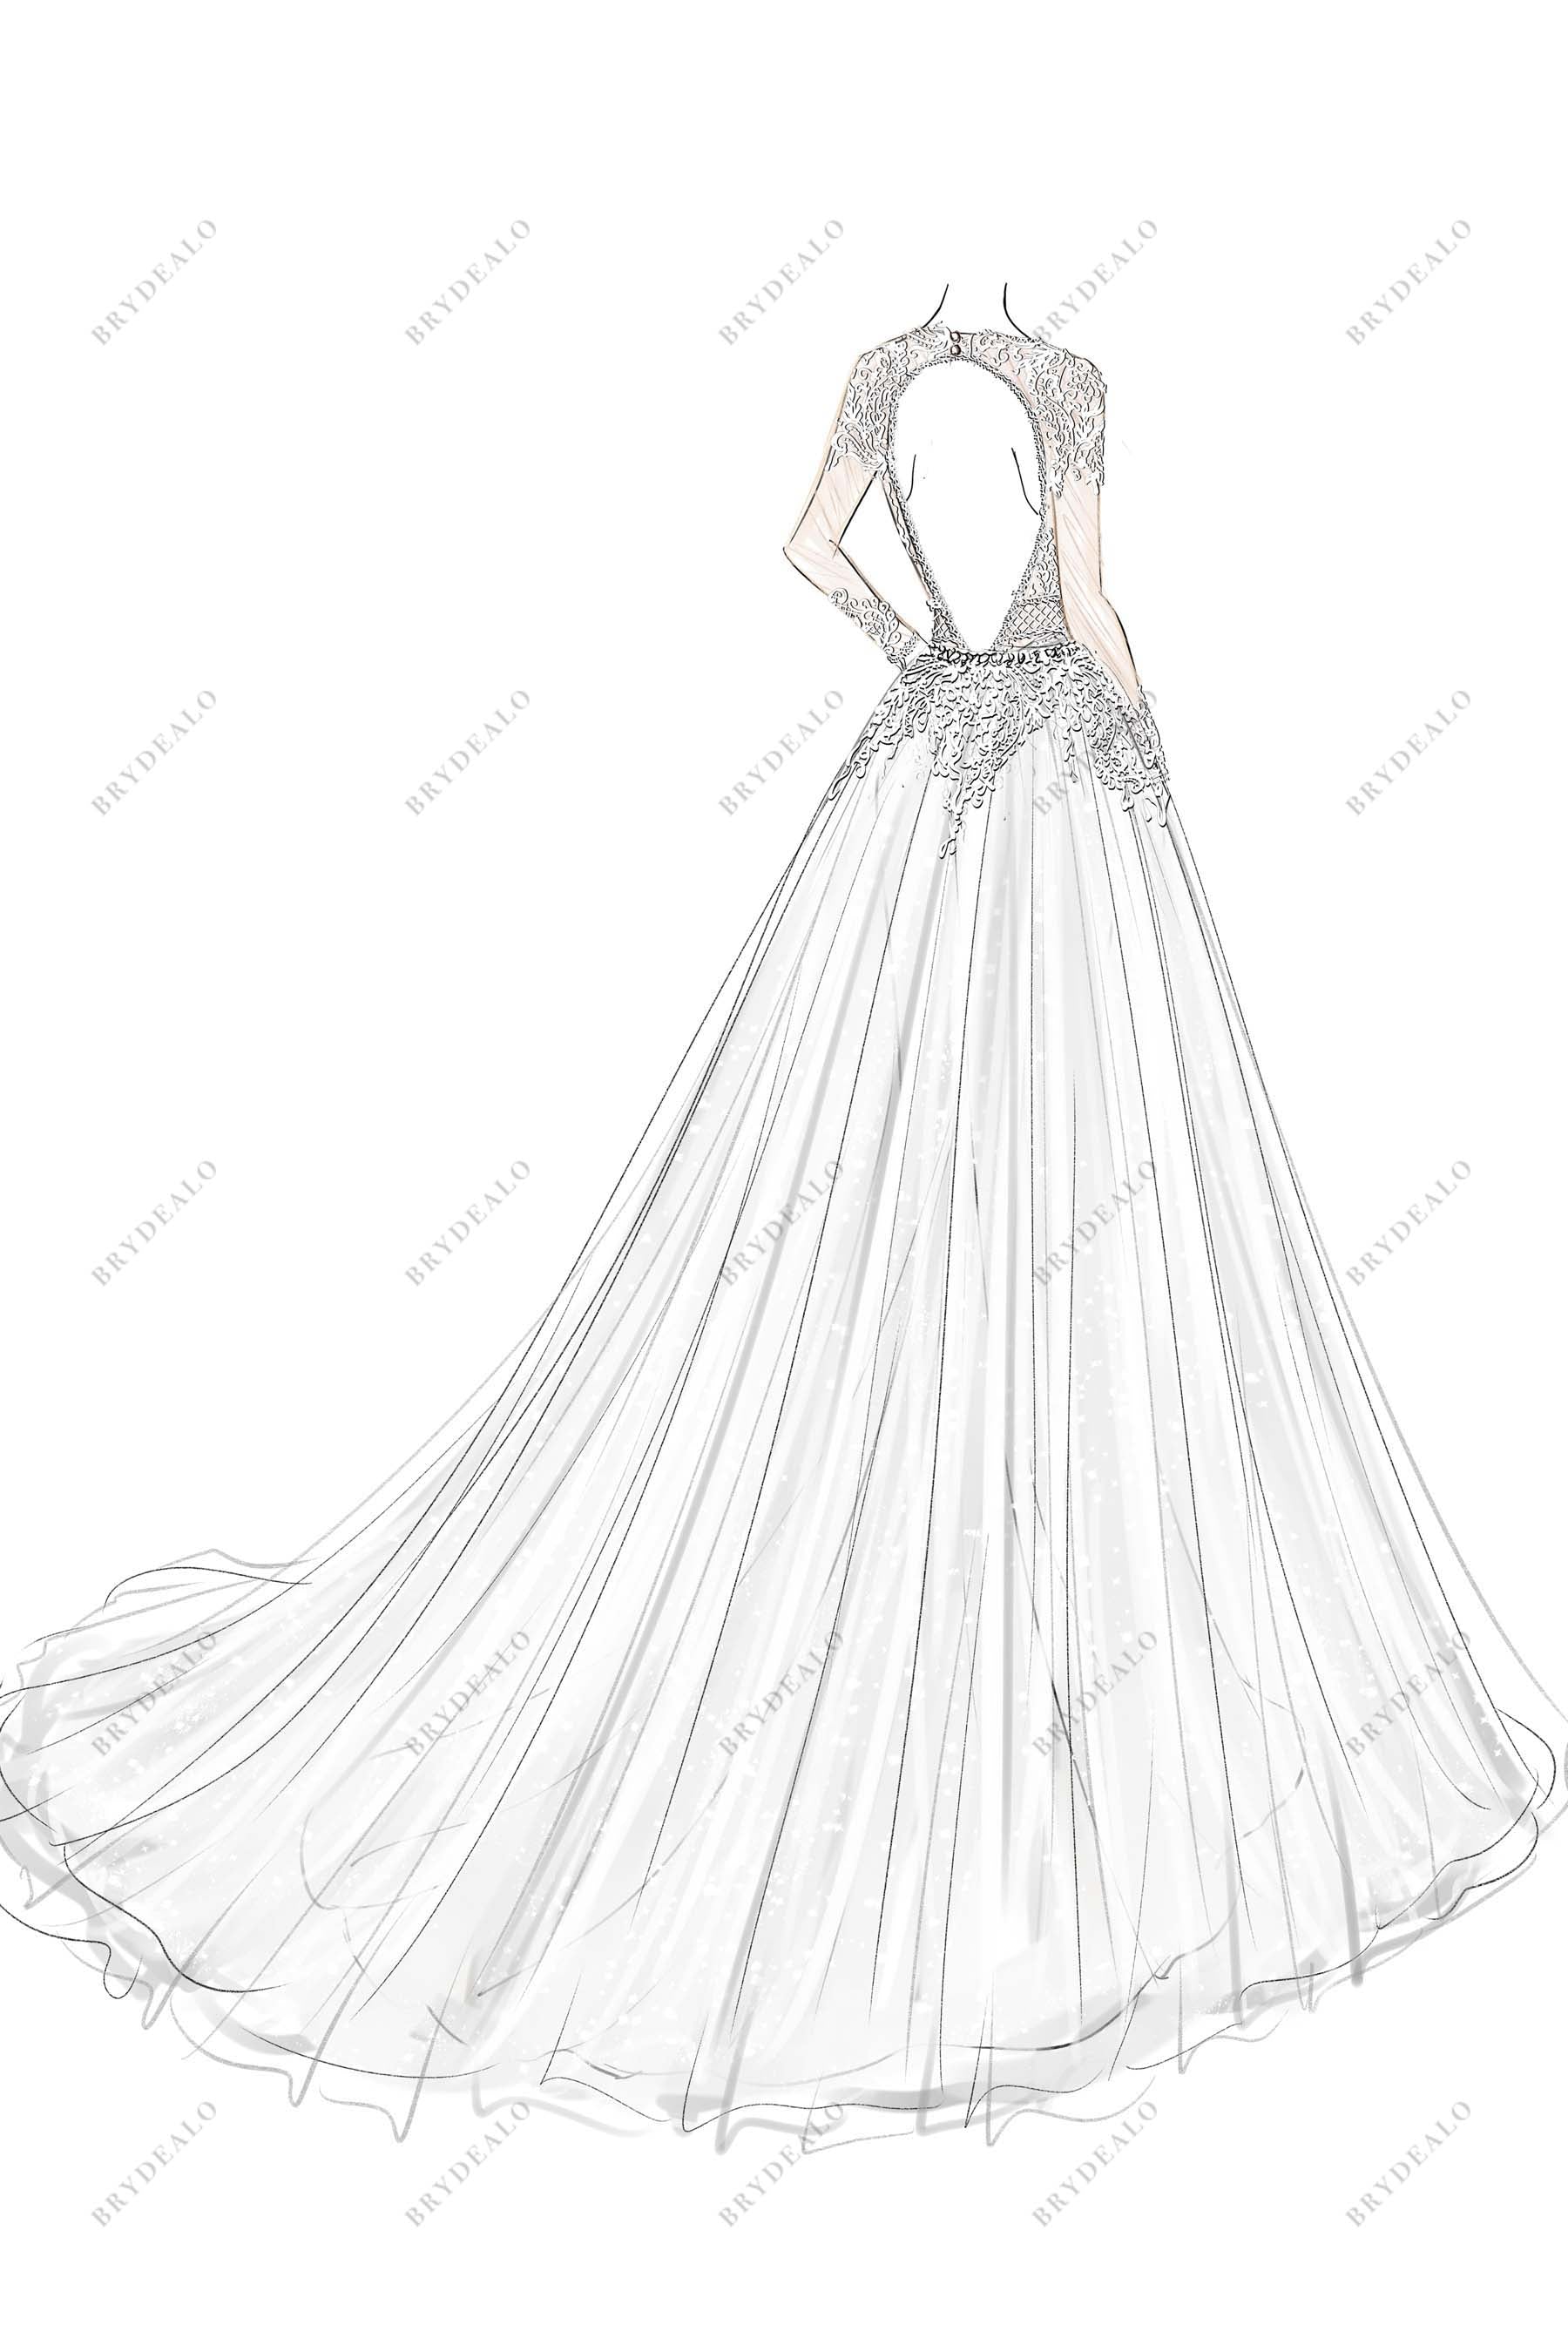 sheer lace sleeves custom made wedding ball gown sketch